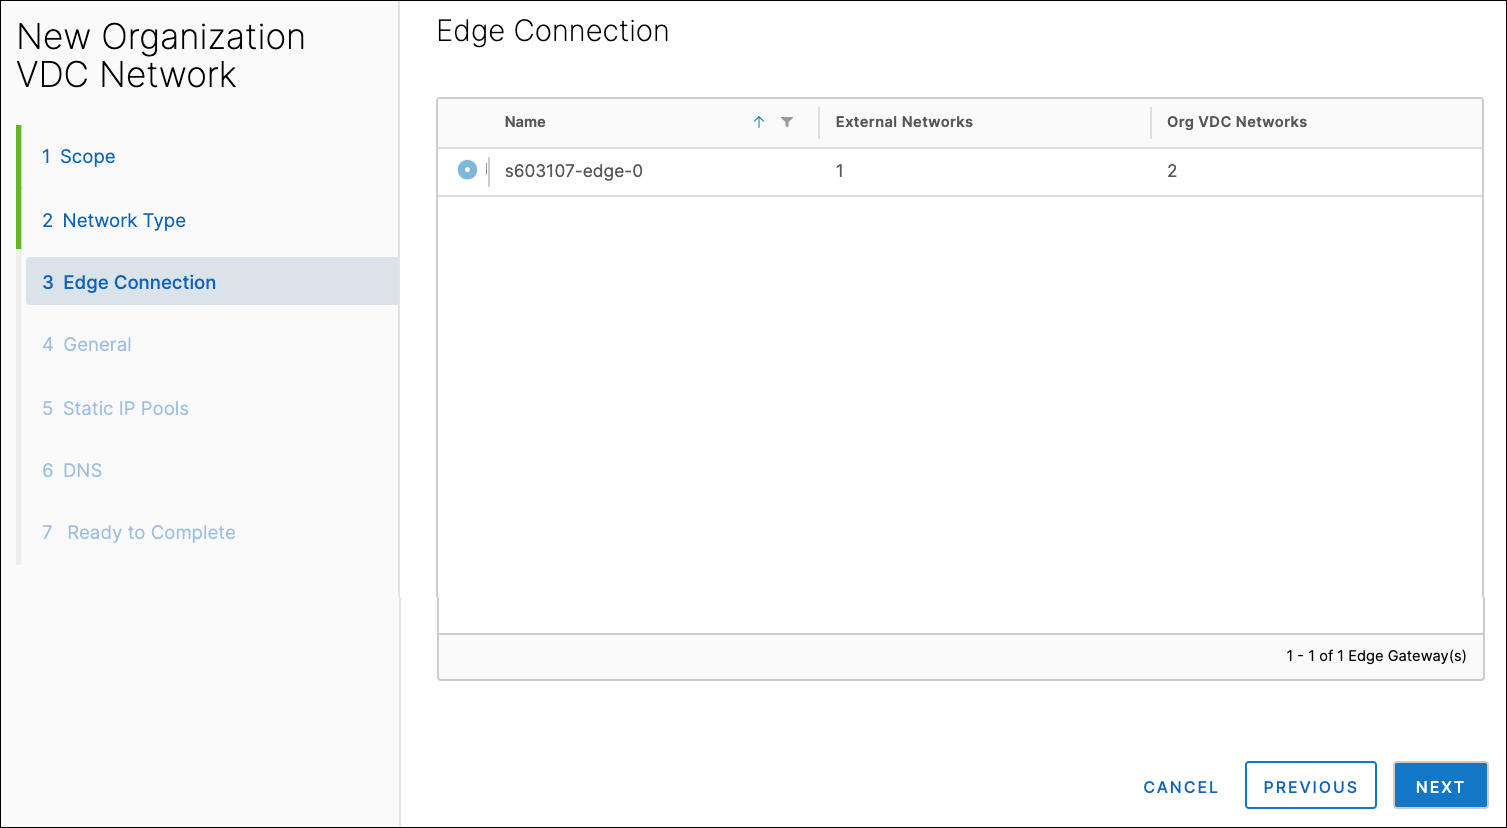 New Organization VDC Network window, Edge Connection section.